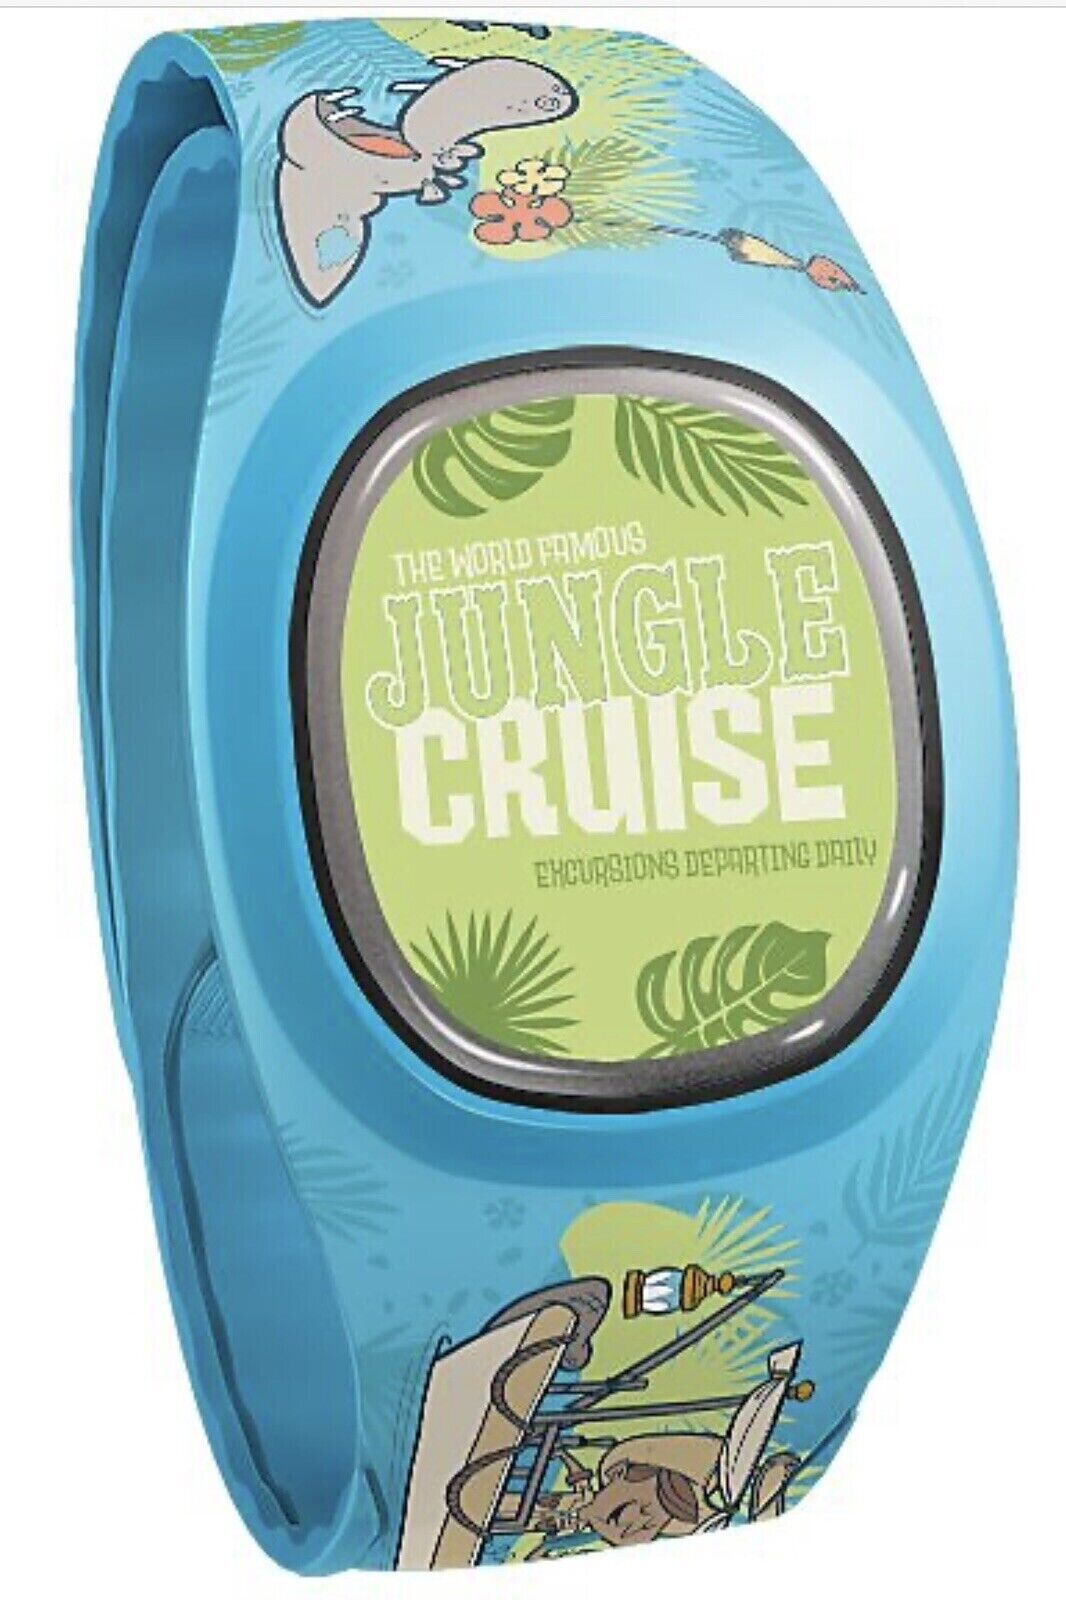 Disney Parks Jungle Cruise Attraction Skipper Blue Magicband Plus Unlinked NEW